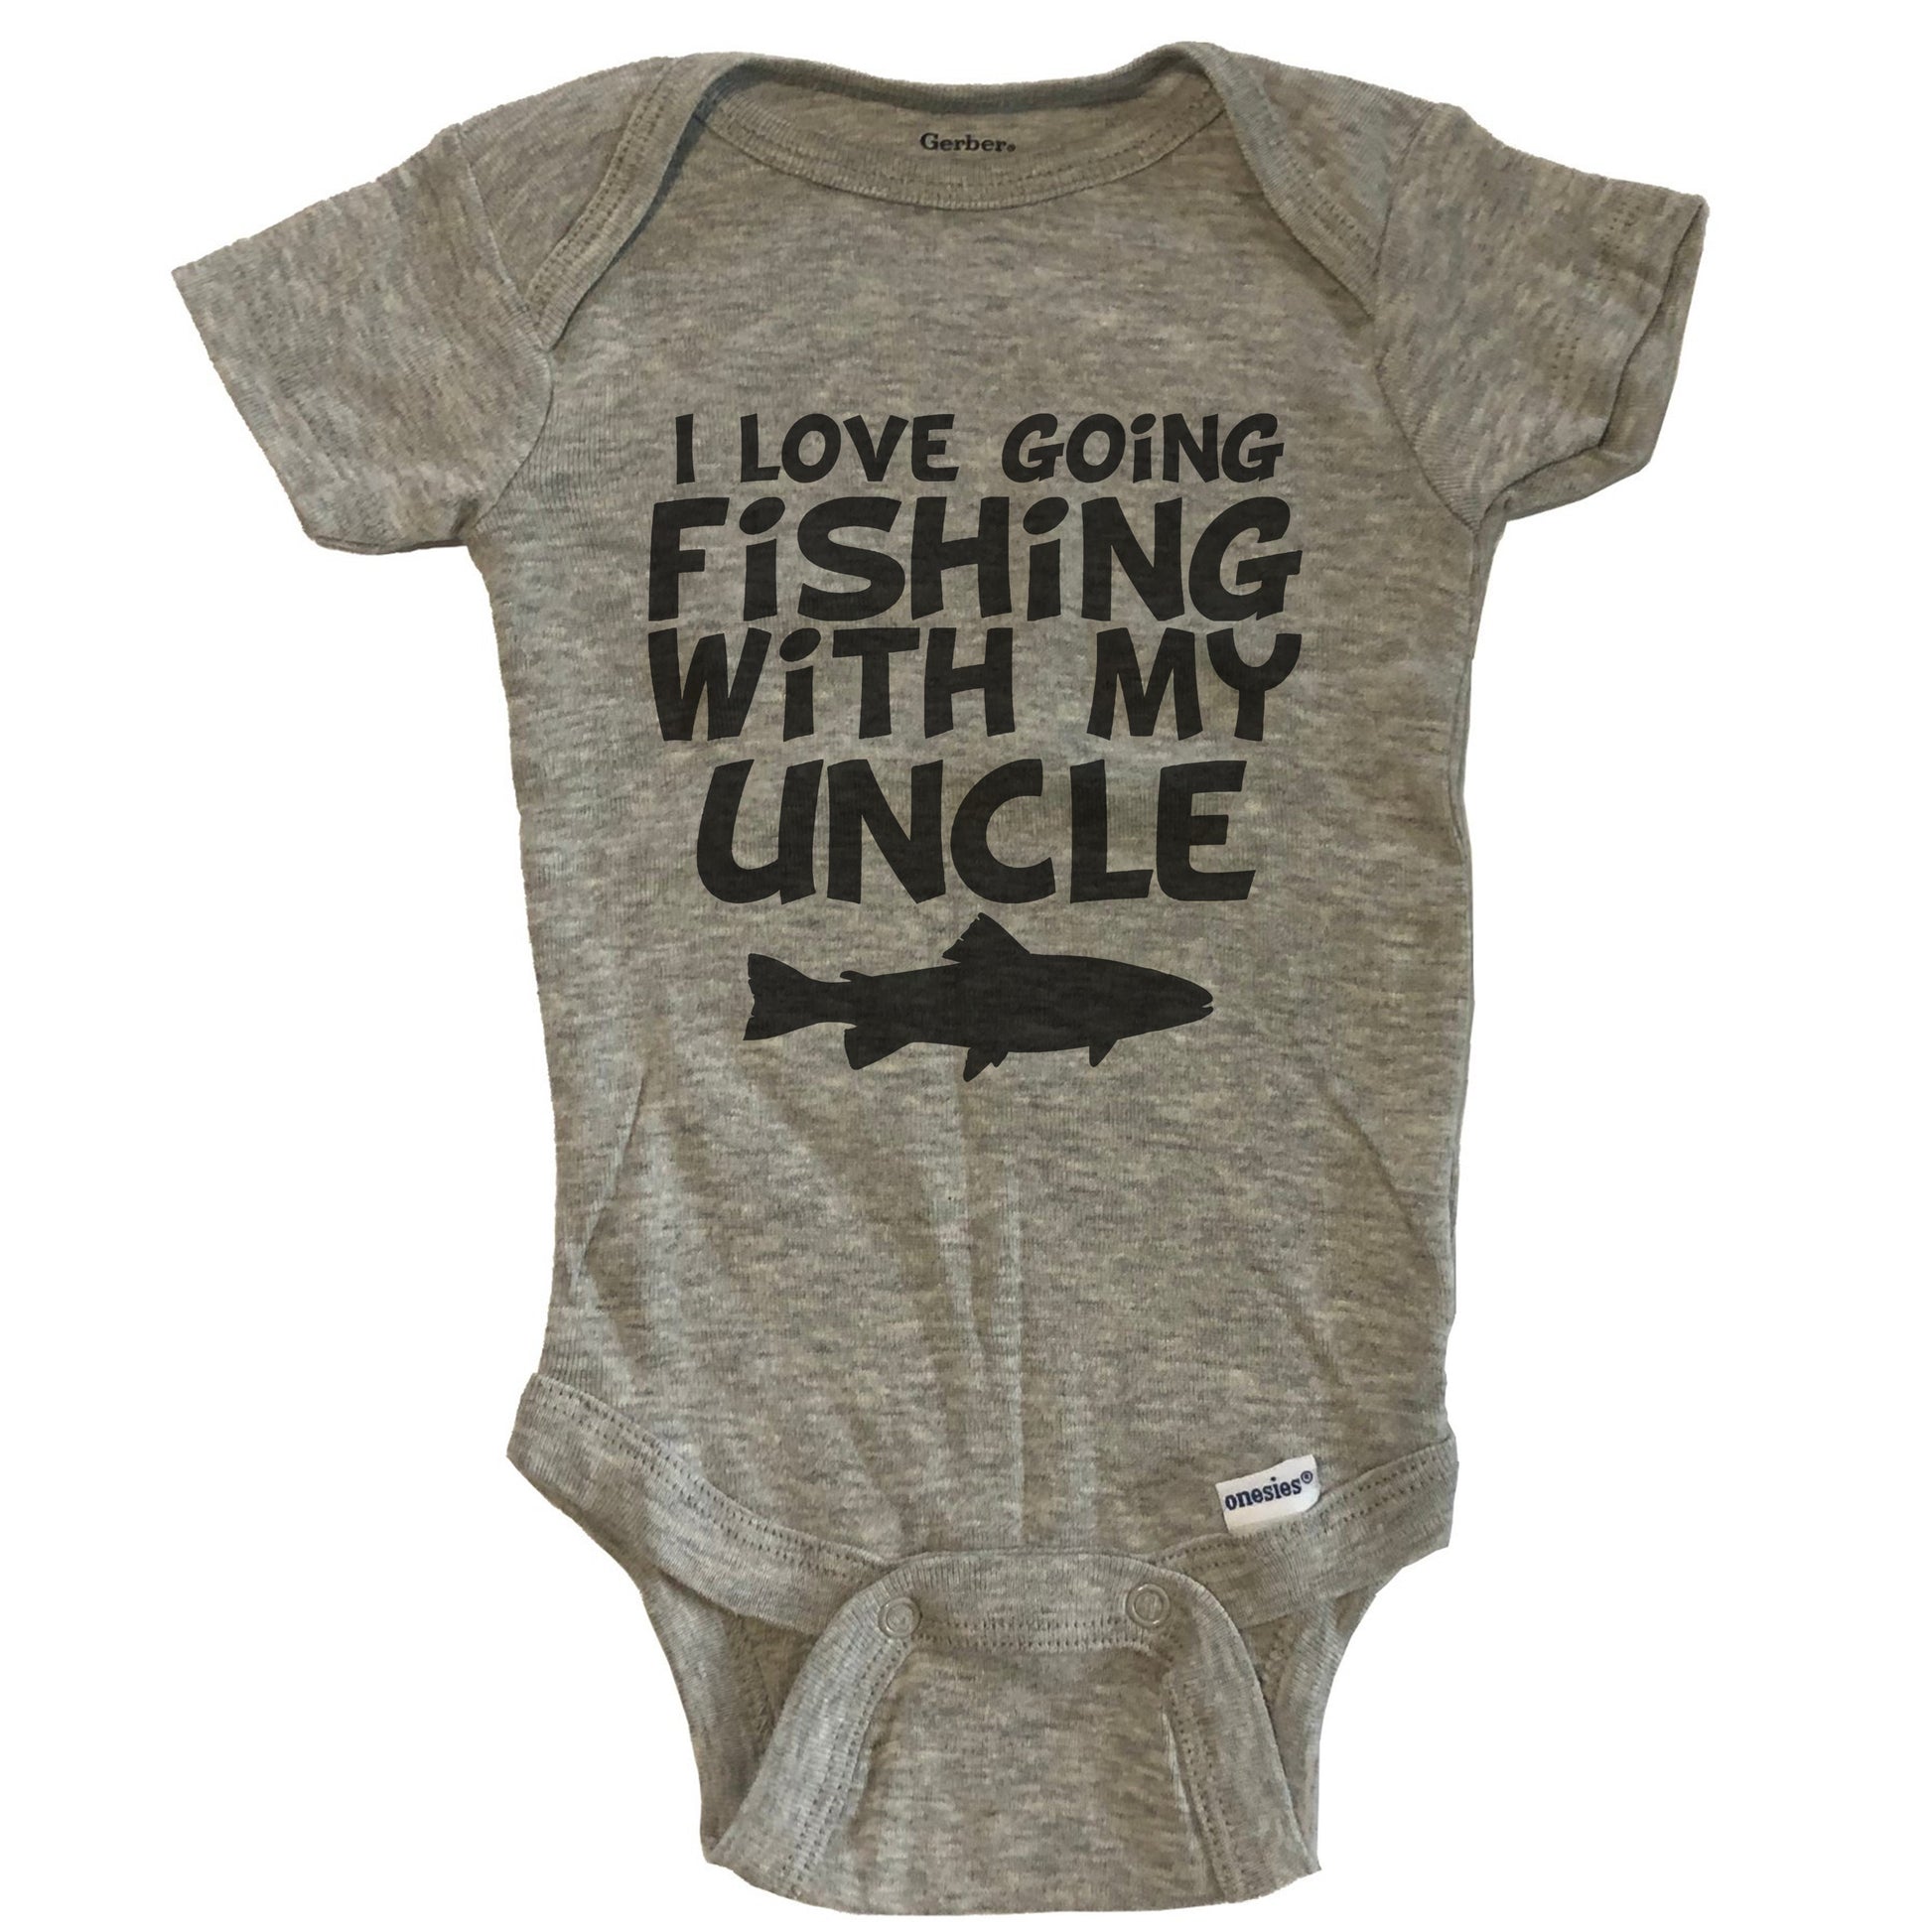 I Love Going Fishing With My Uncle Baby Onesie